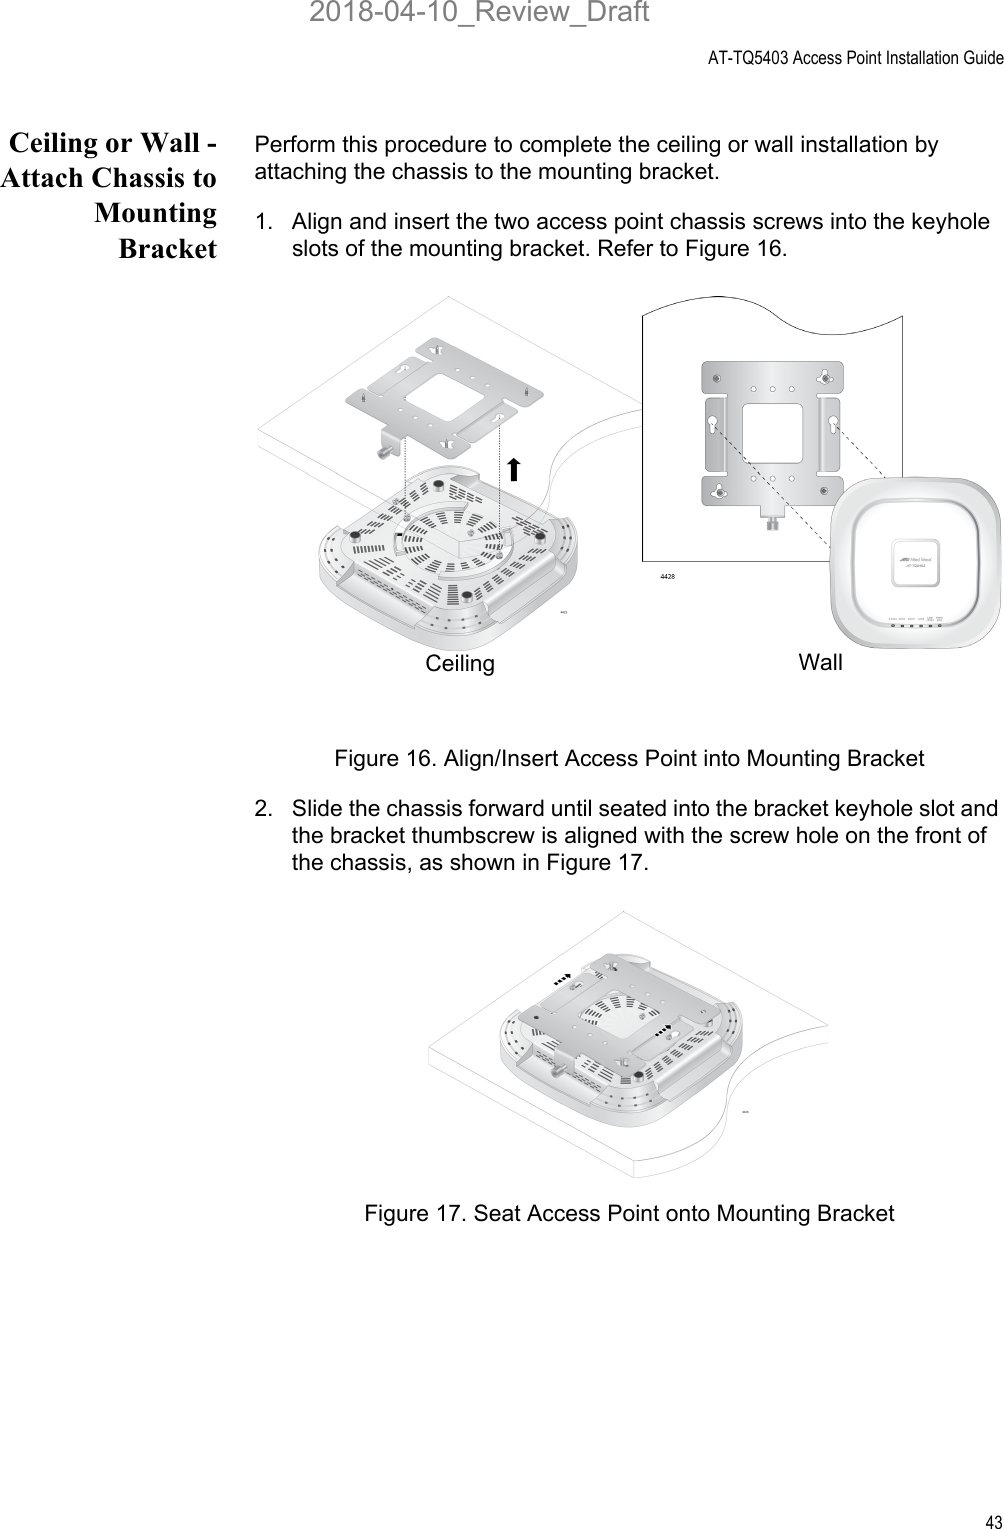 AT-TQ5403 Access Point Installation Guide43Ceiling or Wall -Attach Chassis toMountingBracketPerform this procedure to complete the ceiling or wall installation by attaching the chassis to the mounting bracket.1. Align and insert the two access point chassis screws into the keyhole slots of the mounting bracket. Refer to Figure 16.Figure 16. Align/Insert Access Point into Mounting Bracket2. Slide the chassis forward until seated into the bracket keyhole slot and the bracket thumbscrew is aligned with the screw hole on the front of the chassis, as shown in Figure 17.Figure 17. Seat Access Point onto Mounting BracketCeiling  Wall 2018-04-10_Review_Draft